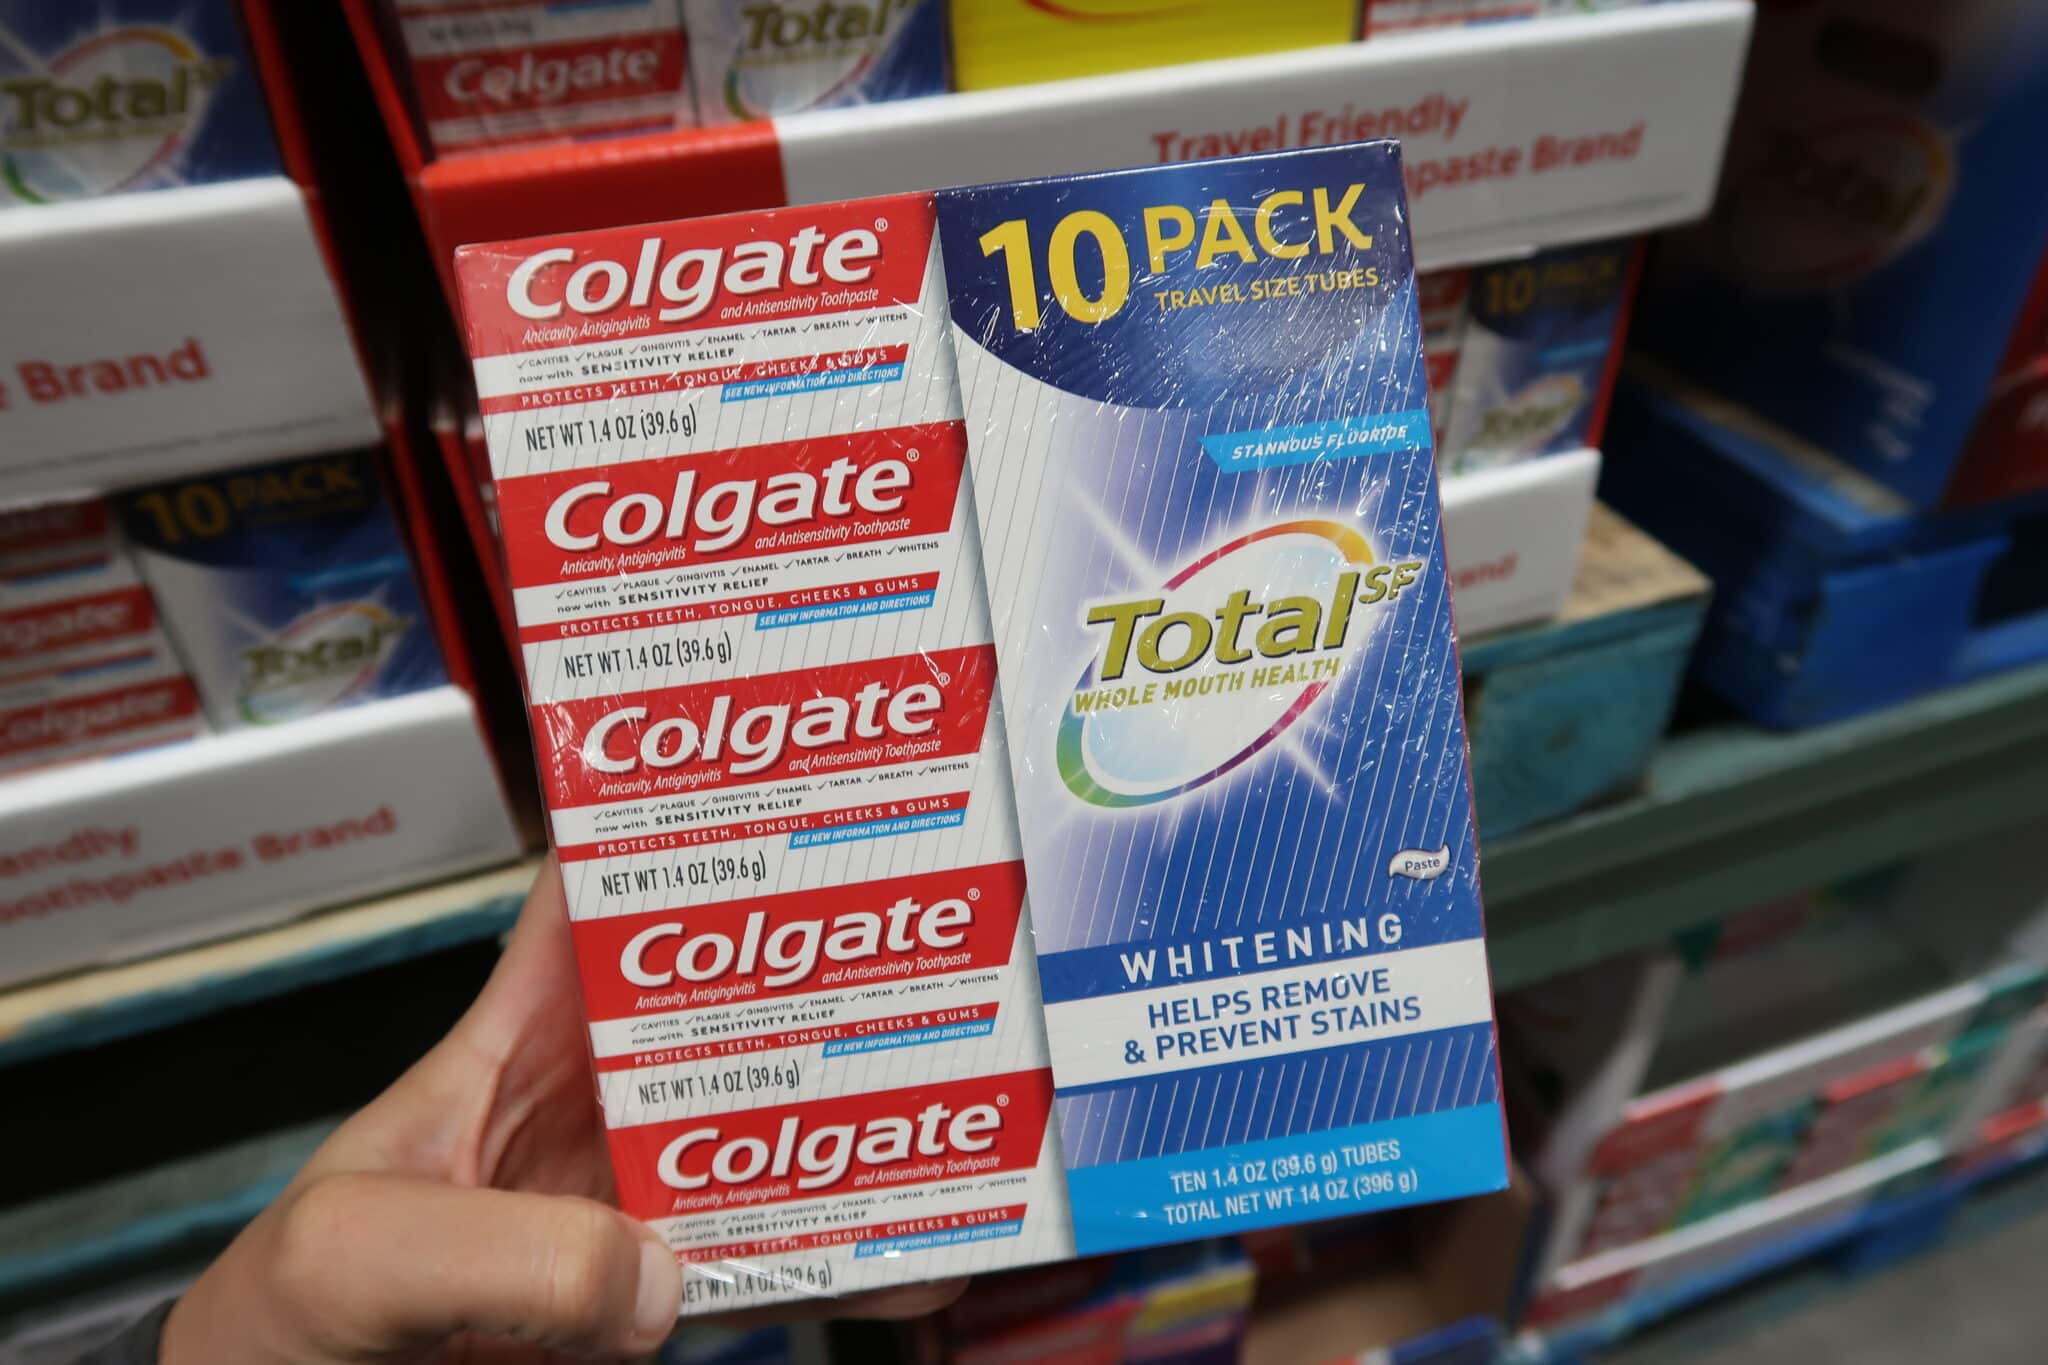 Colgate Travel Toothpaste ONLY 4.99 for 10! My BJs